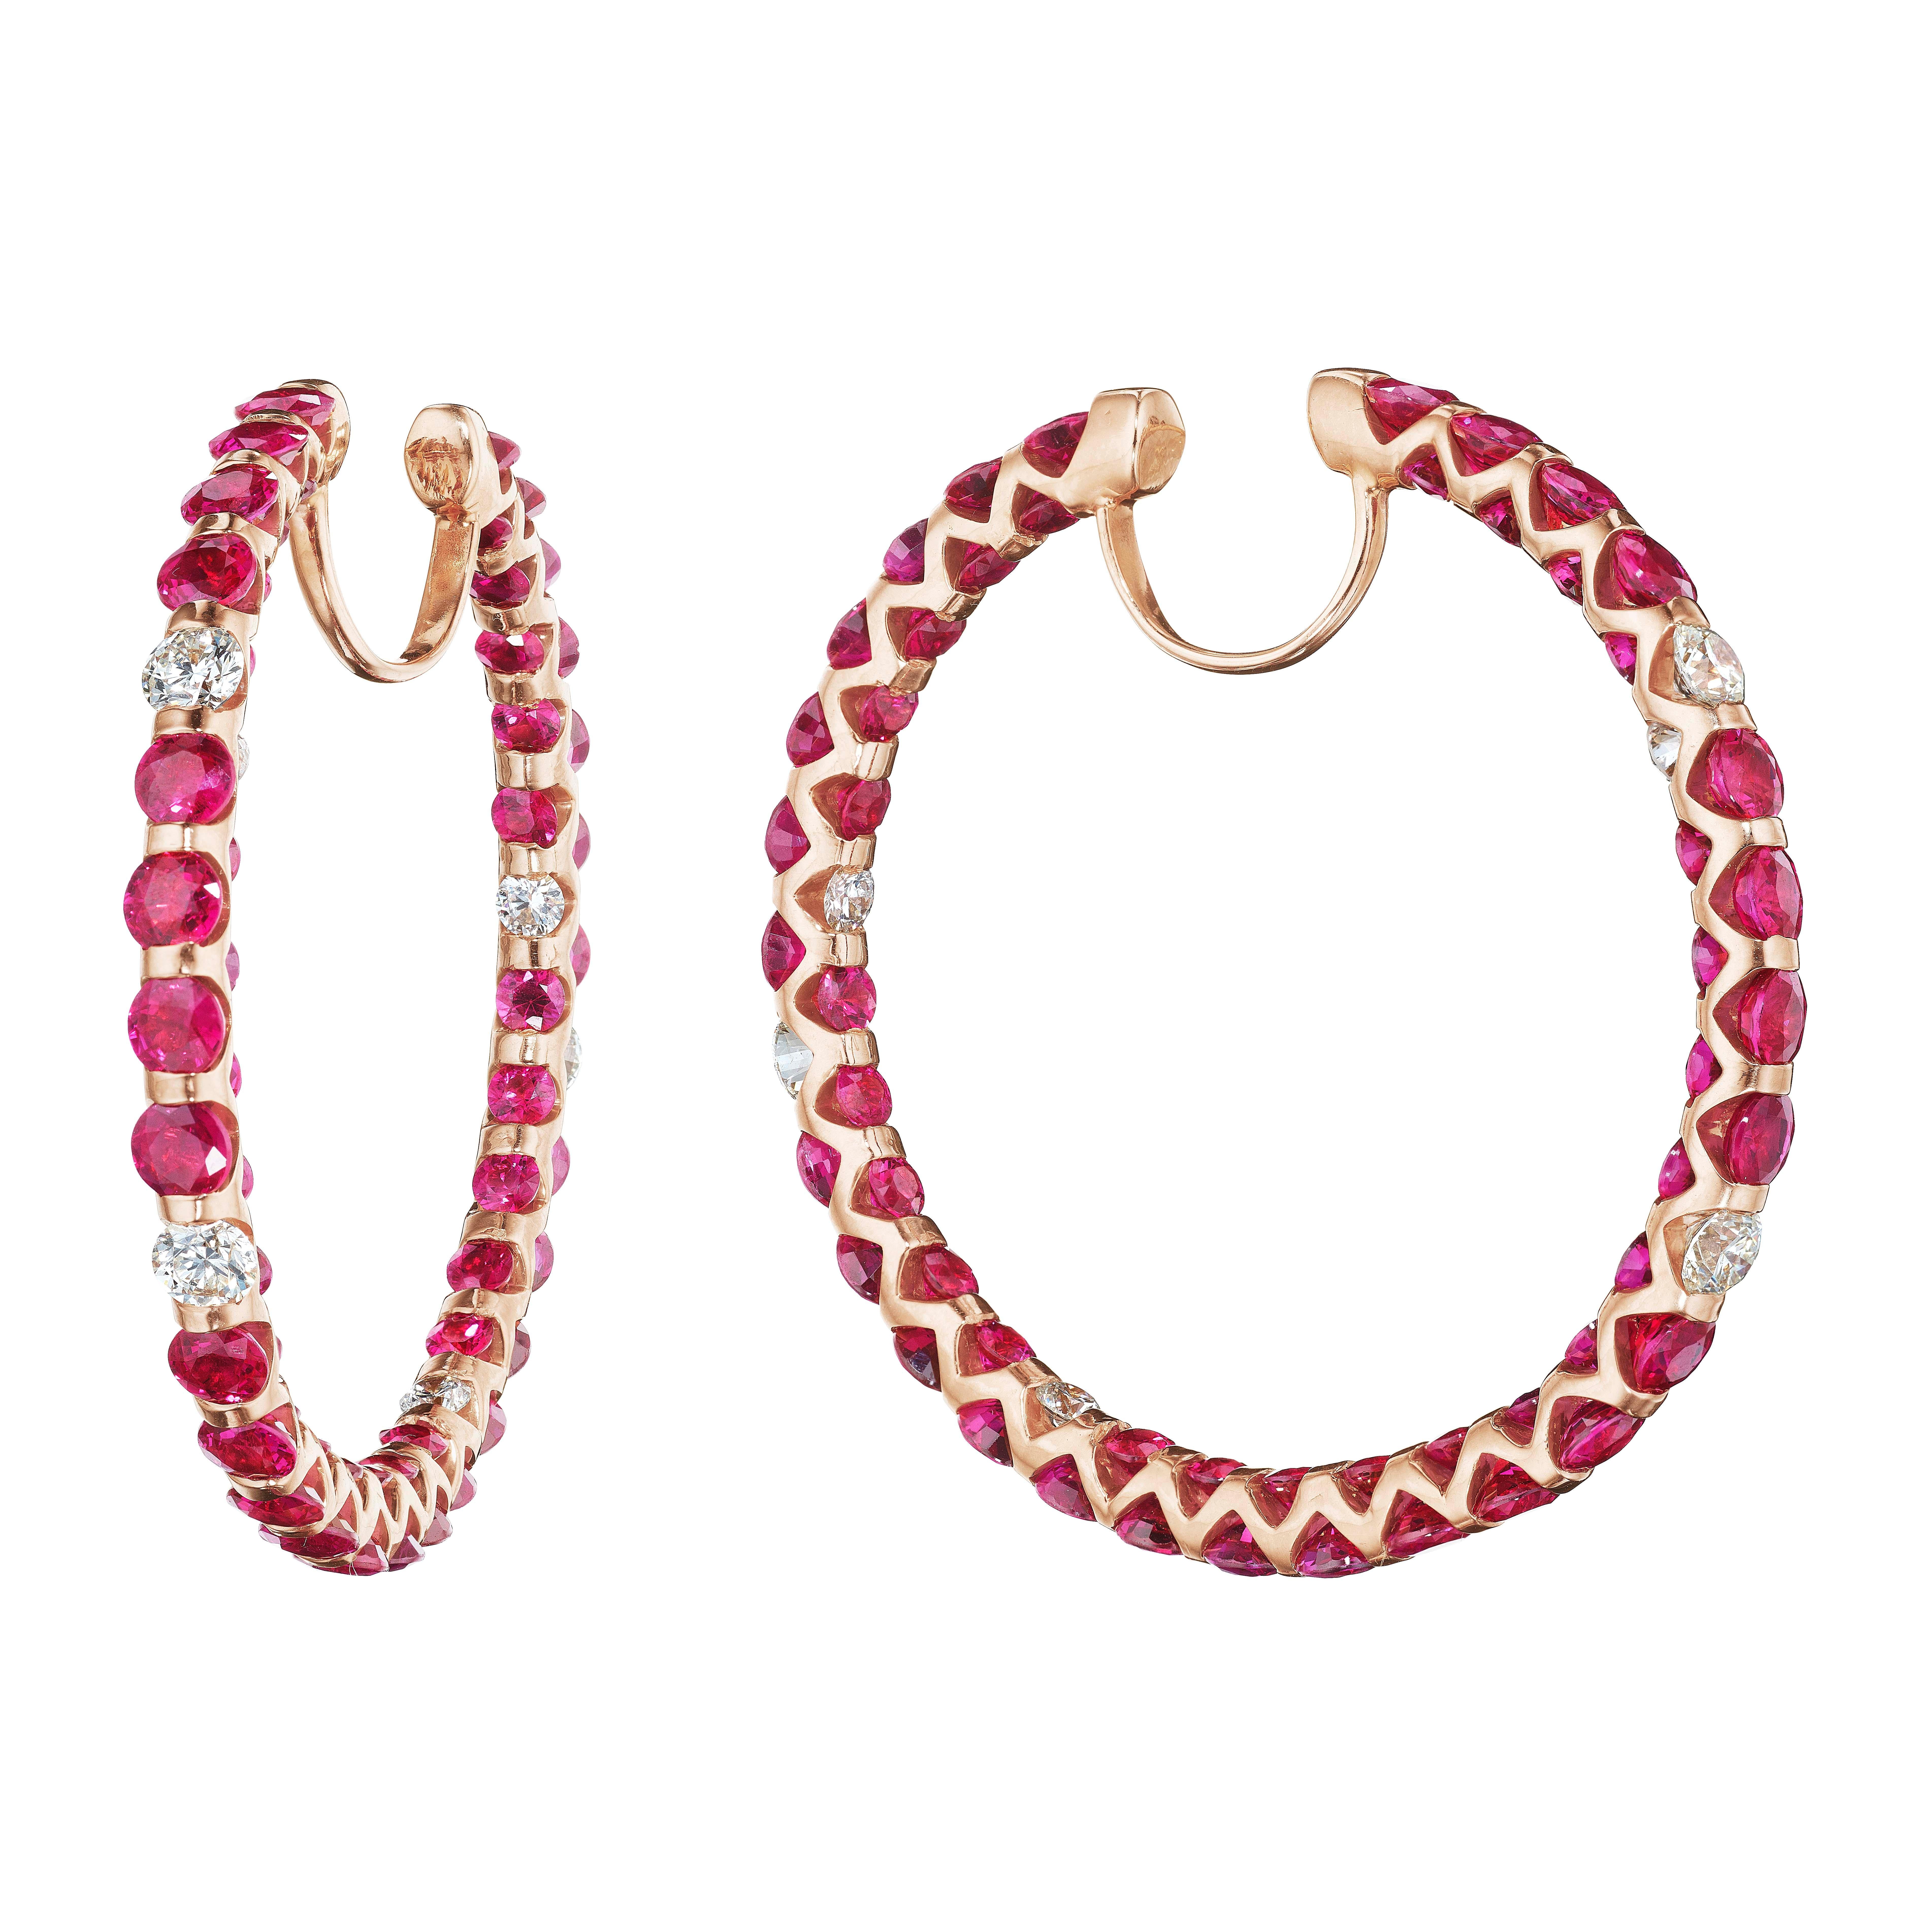 Gorgeous Pair of Ruby and Diamond Hoop Earrings.
Rubies set inside out with no more space to put another stone.
106 Round Rubies weighing 19.50 Carats.
12 Round Diamonds weighing 1.70 Carats.
Set in 18 Karat Rose Gold.